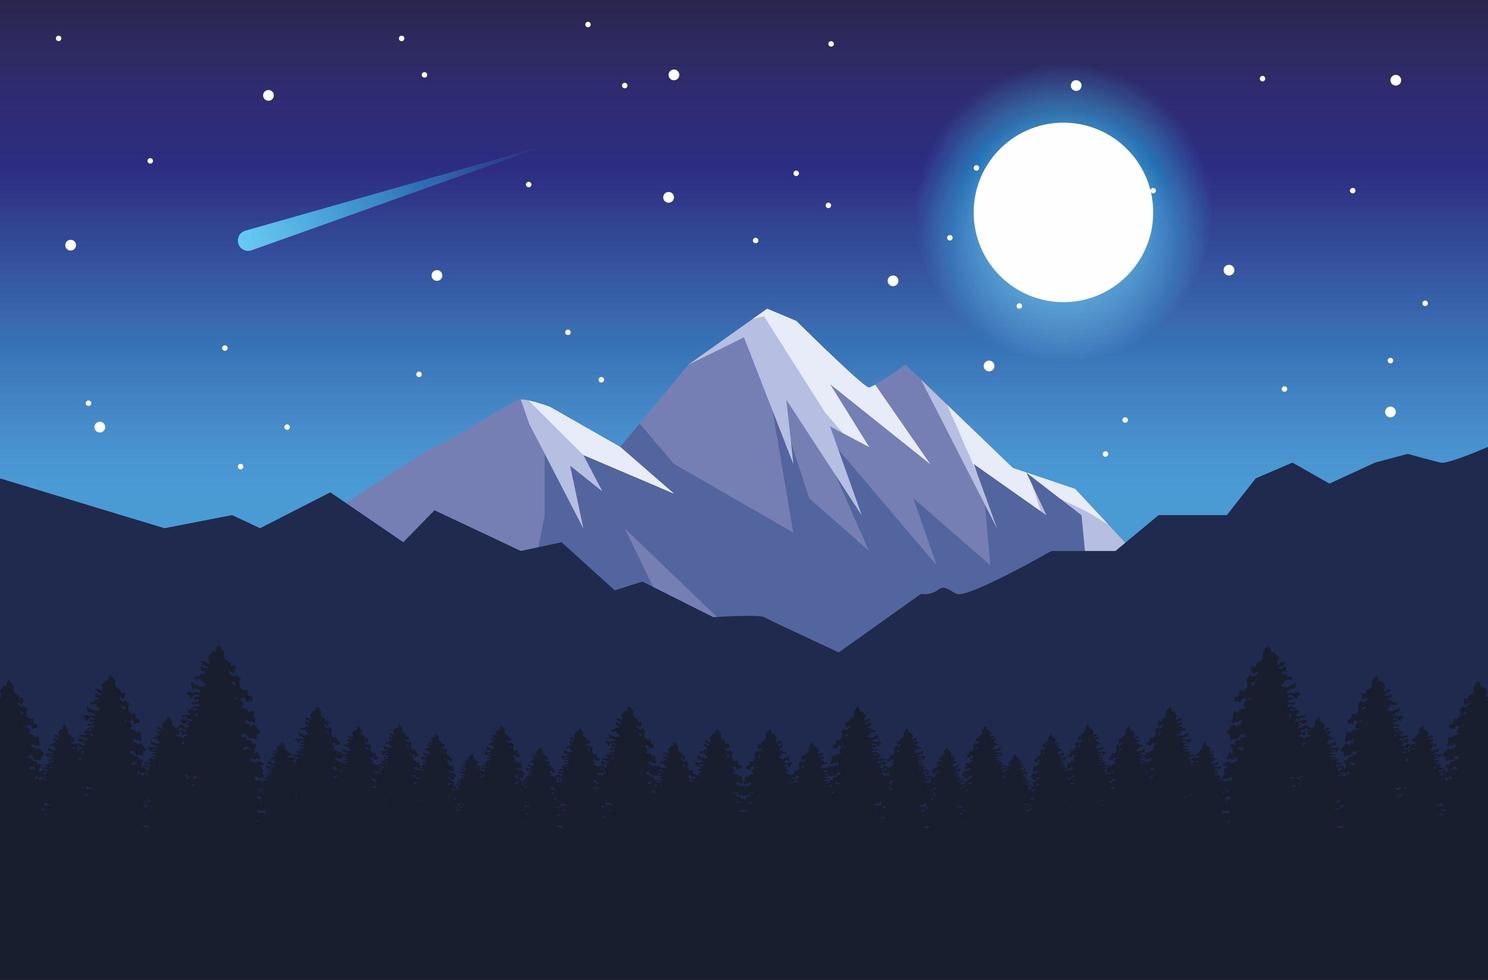 beautiful landscape with mountains night scene vector